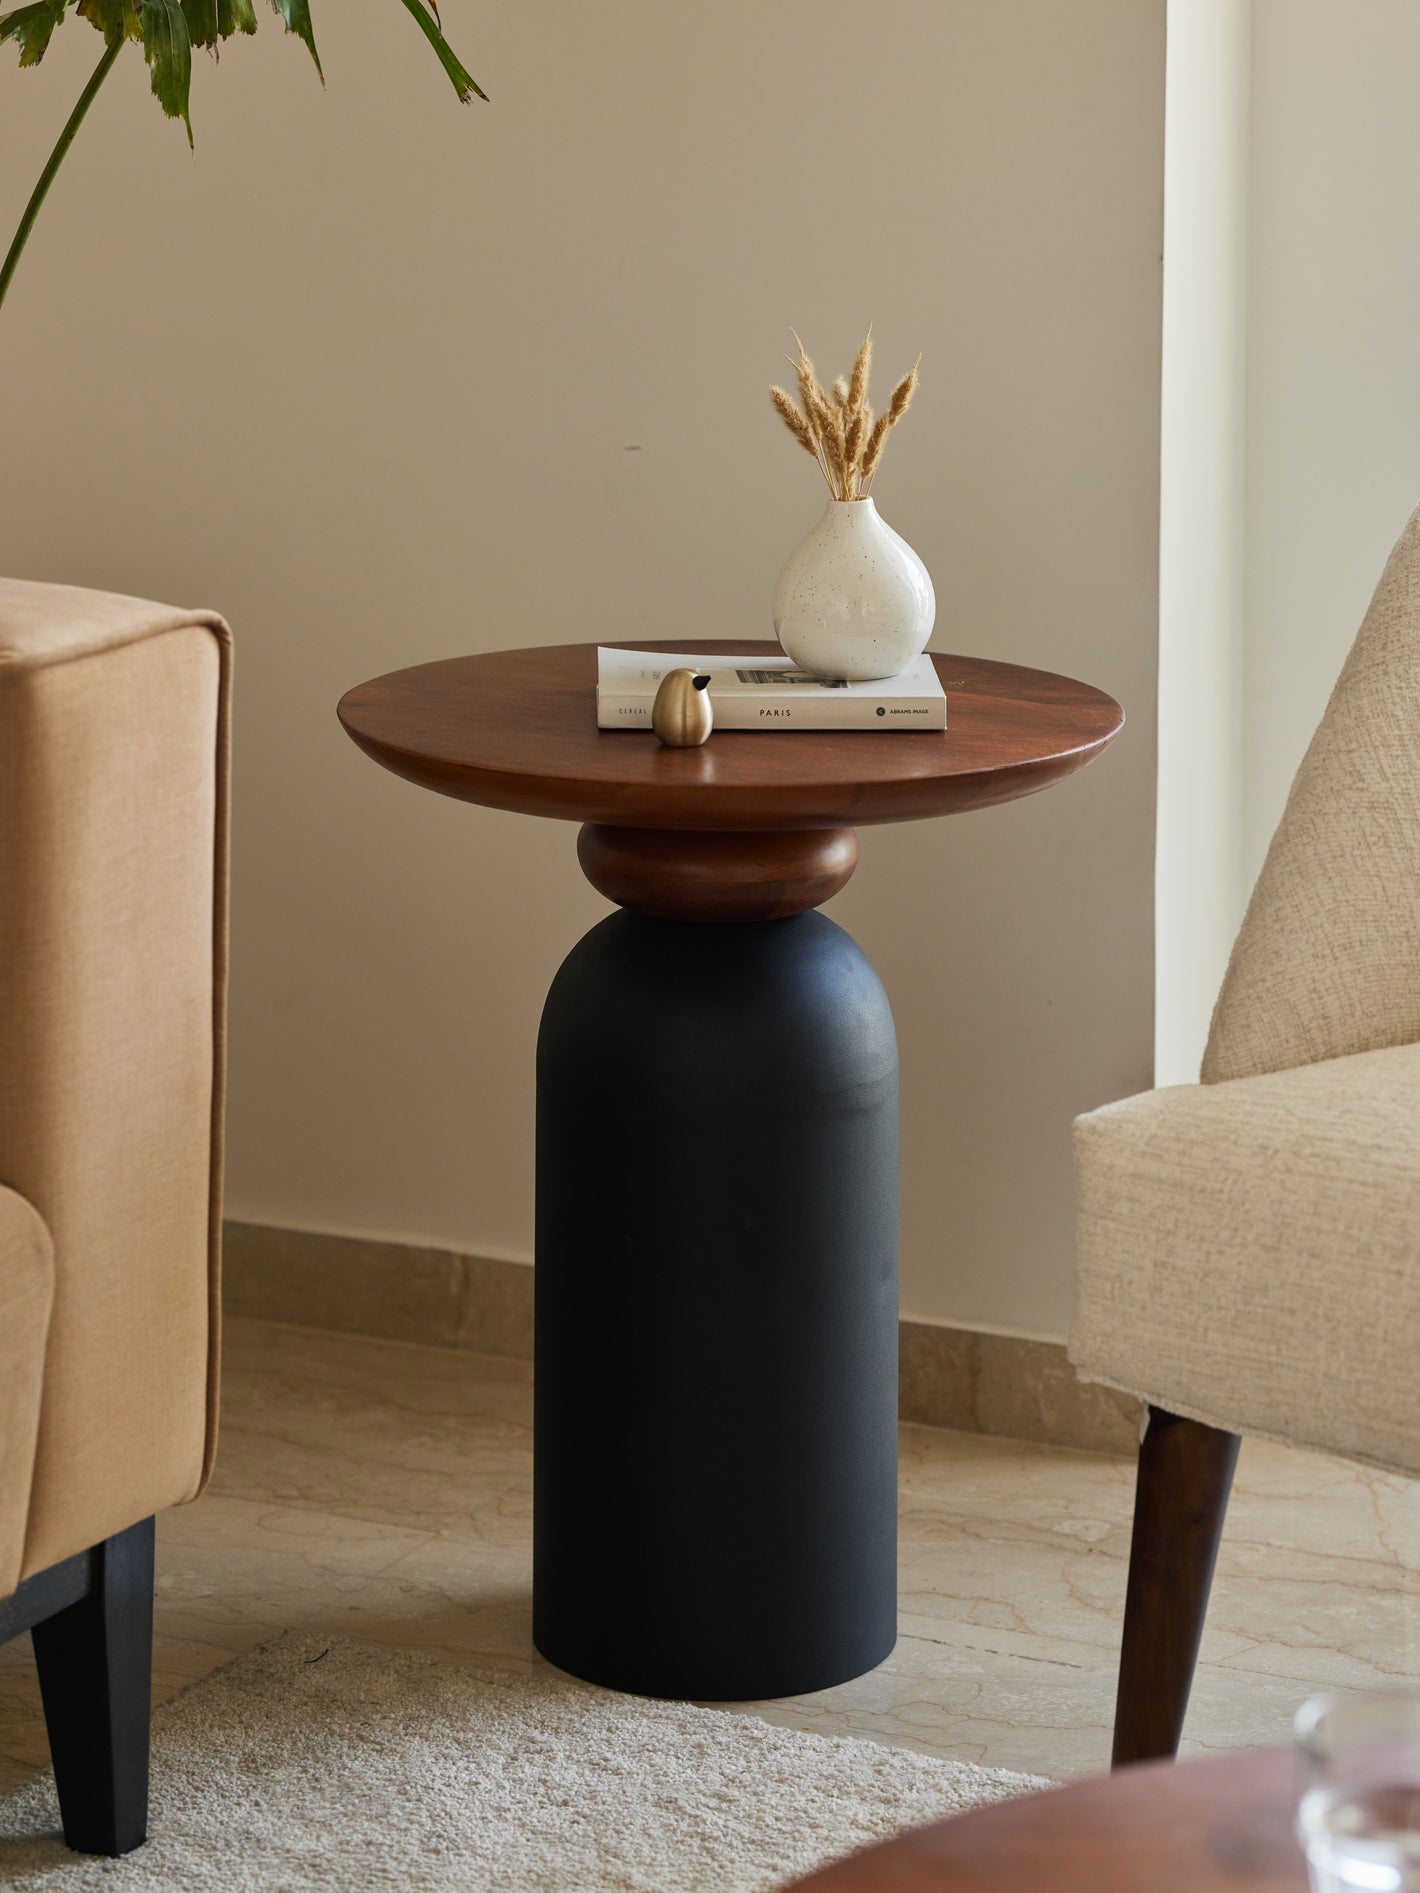 Perisi side table made with metal and solid wood in a living room setting